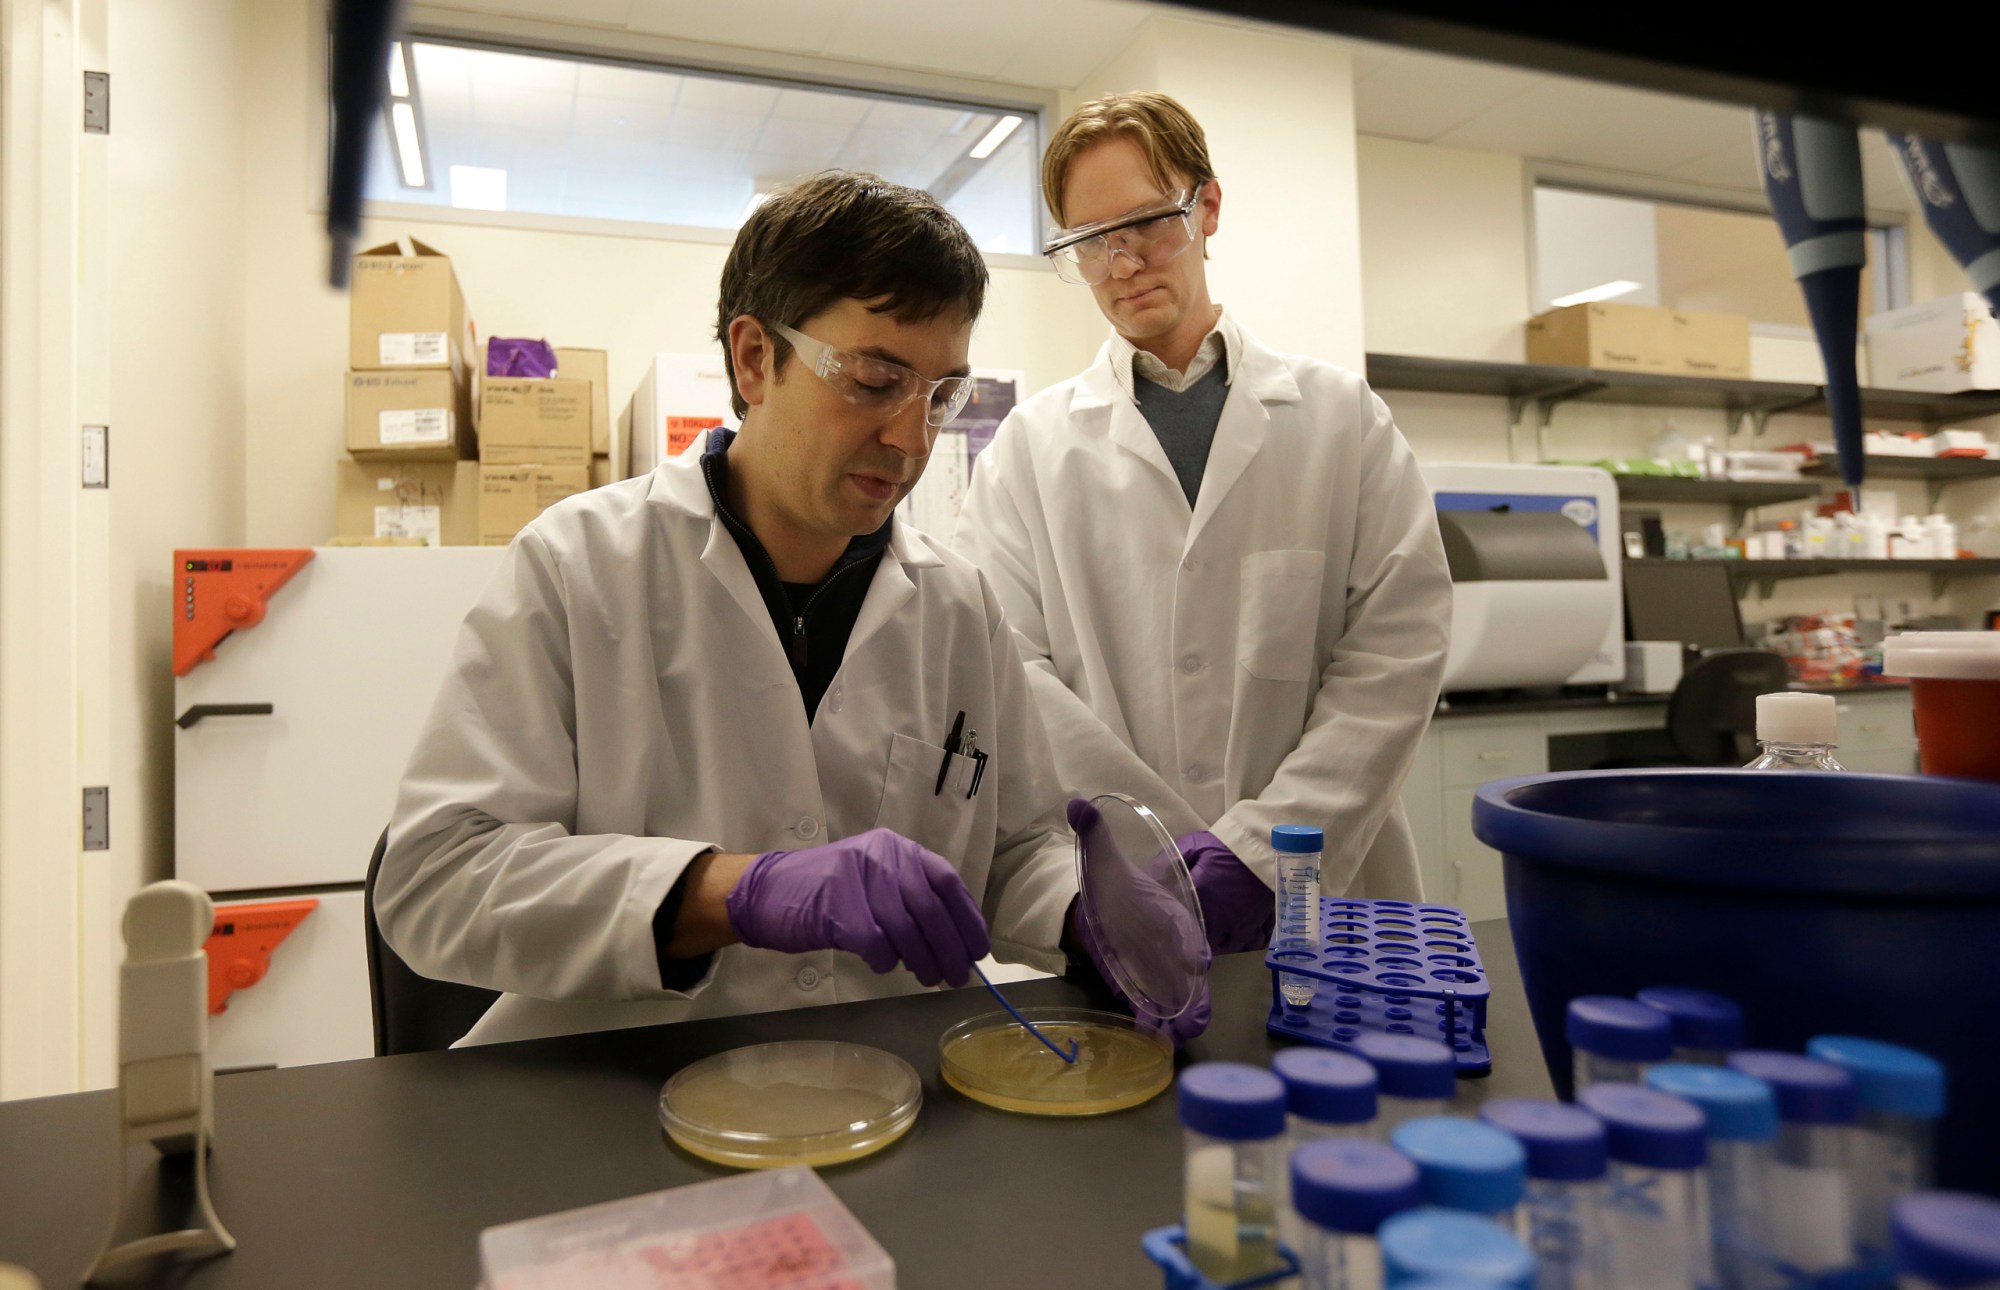 Scientists Matt Drever and Charlie Holst conduct an experiment at the Pfizer laboratory at the University of California at San Francisco. Sequestration will result in substantial cuts to federal funding for research and development. (AP/ Jeff Chiu)